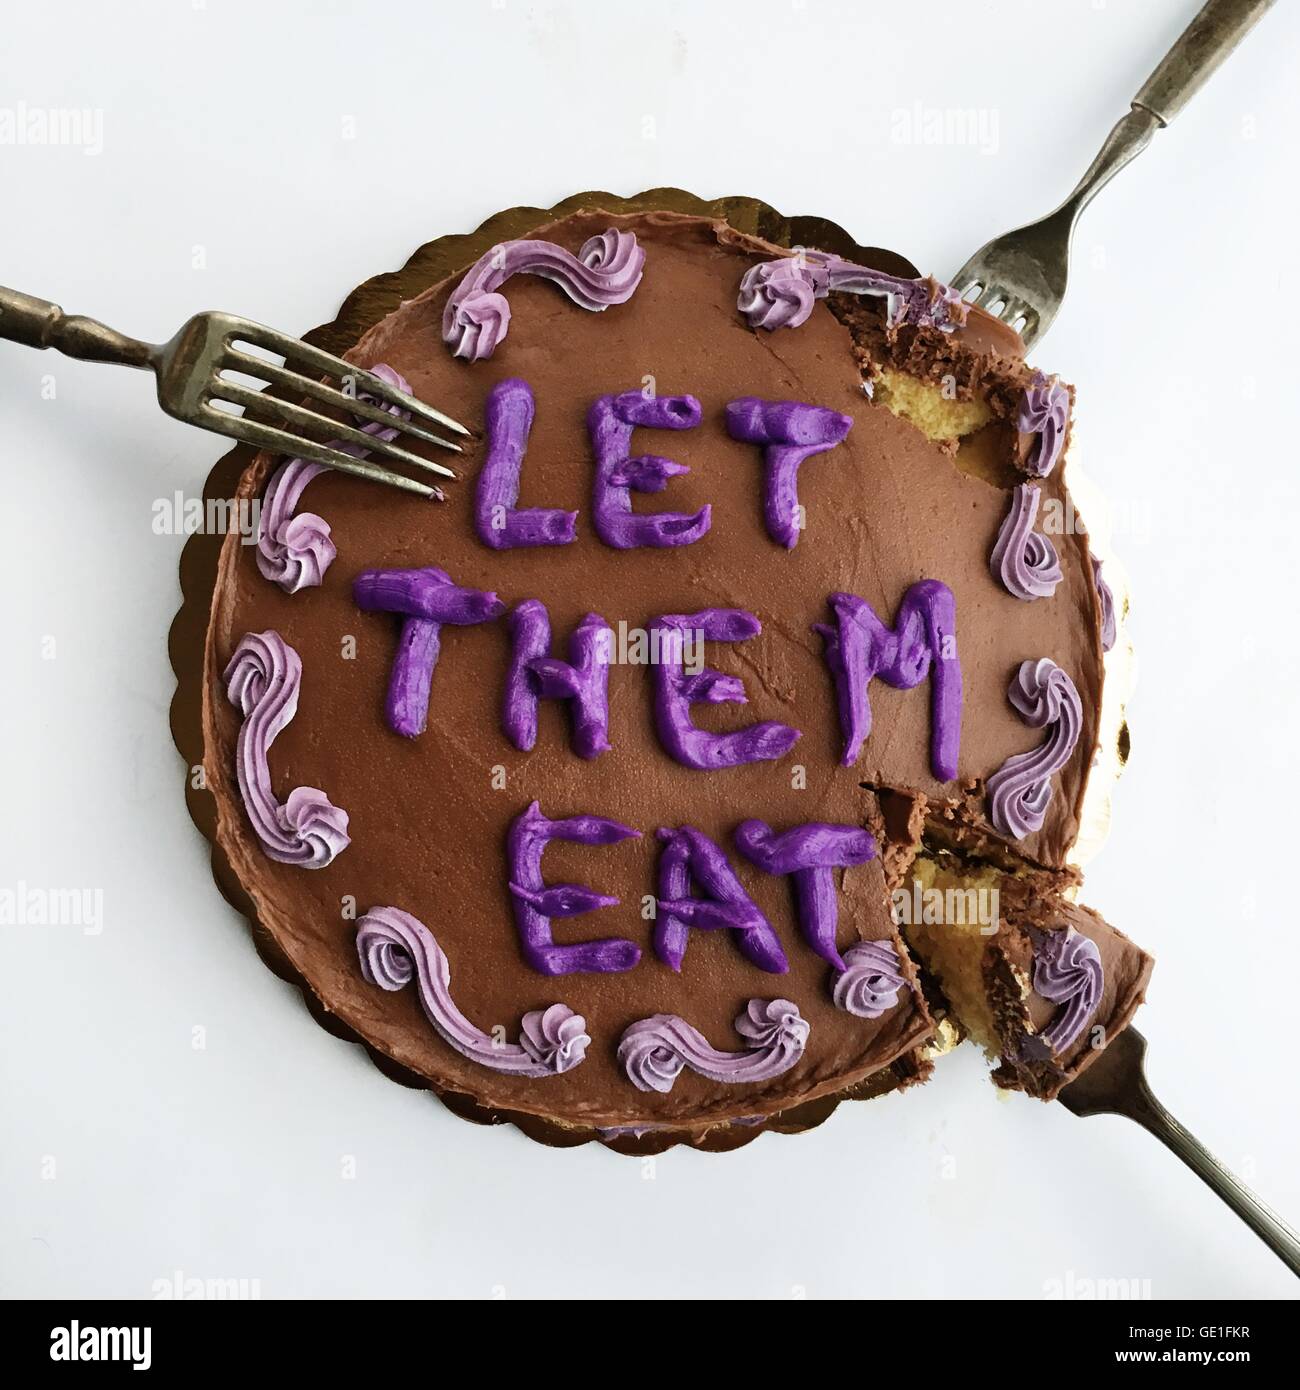 Chocolate cake with Let them eat cake message Stock Photo